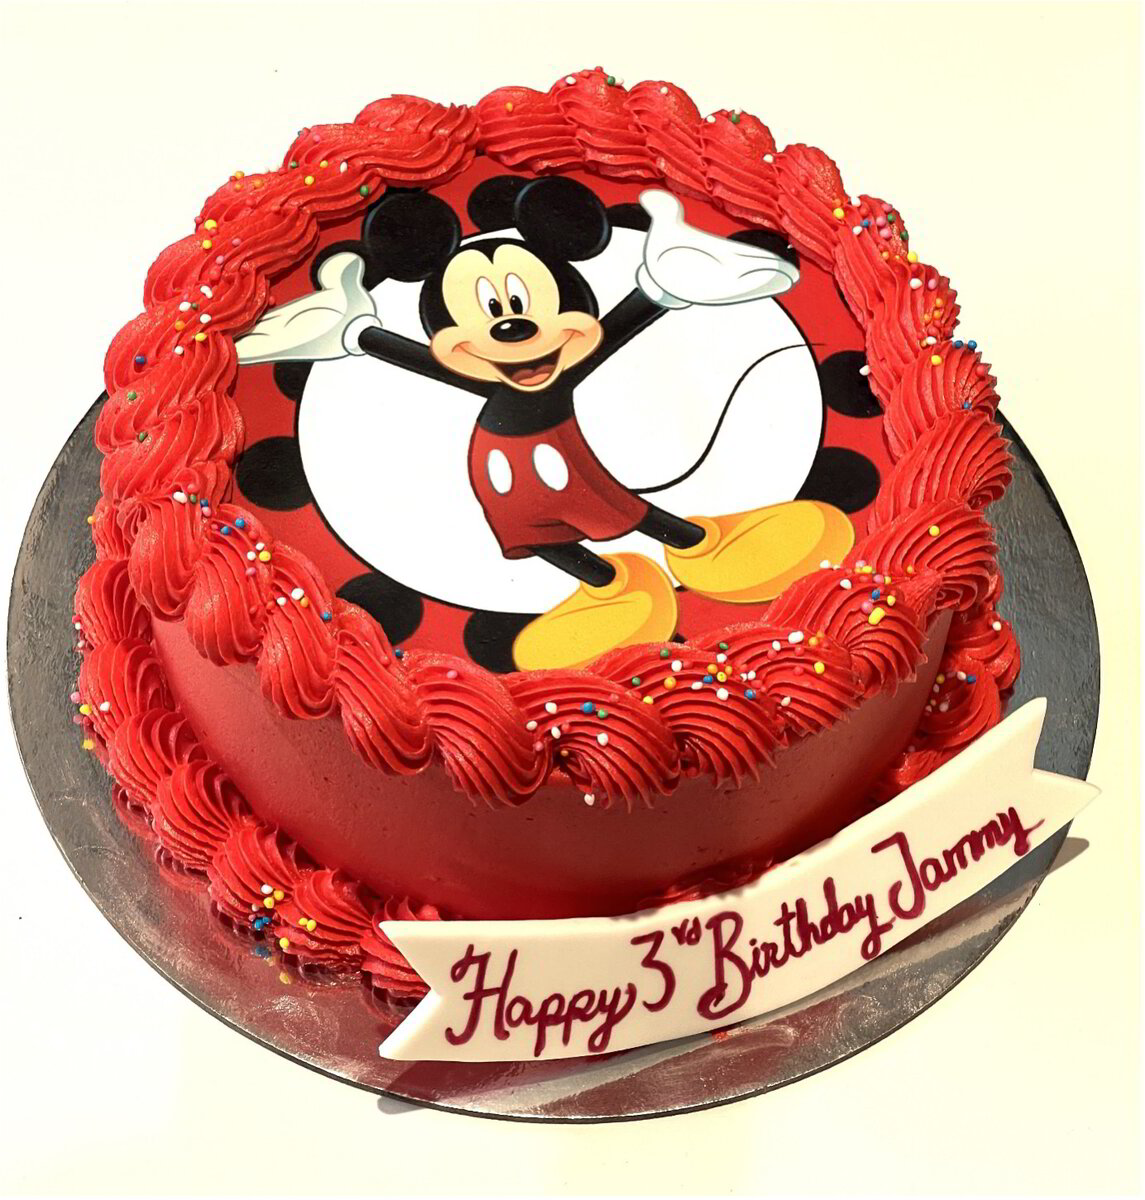 Mickey Mouse-Inspired Cake | Order Online | Oh My Cake!